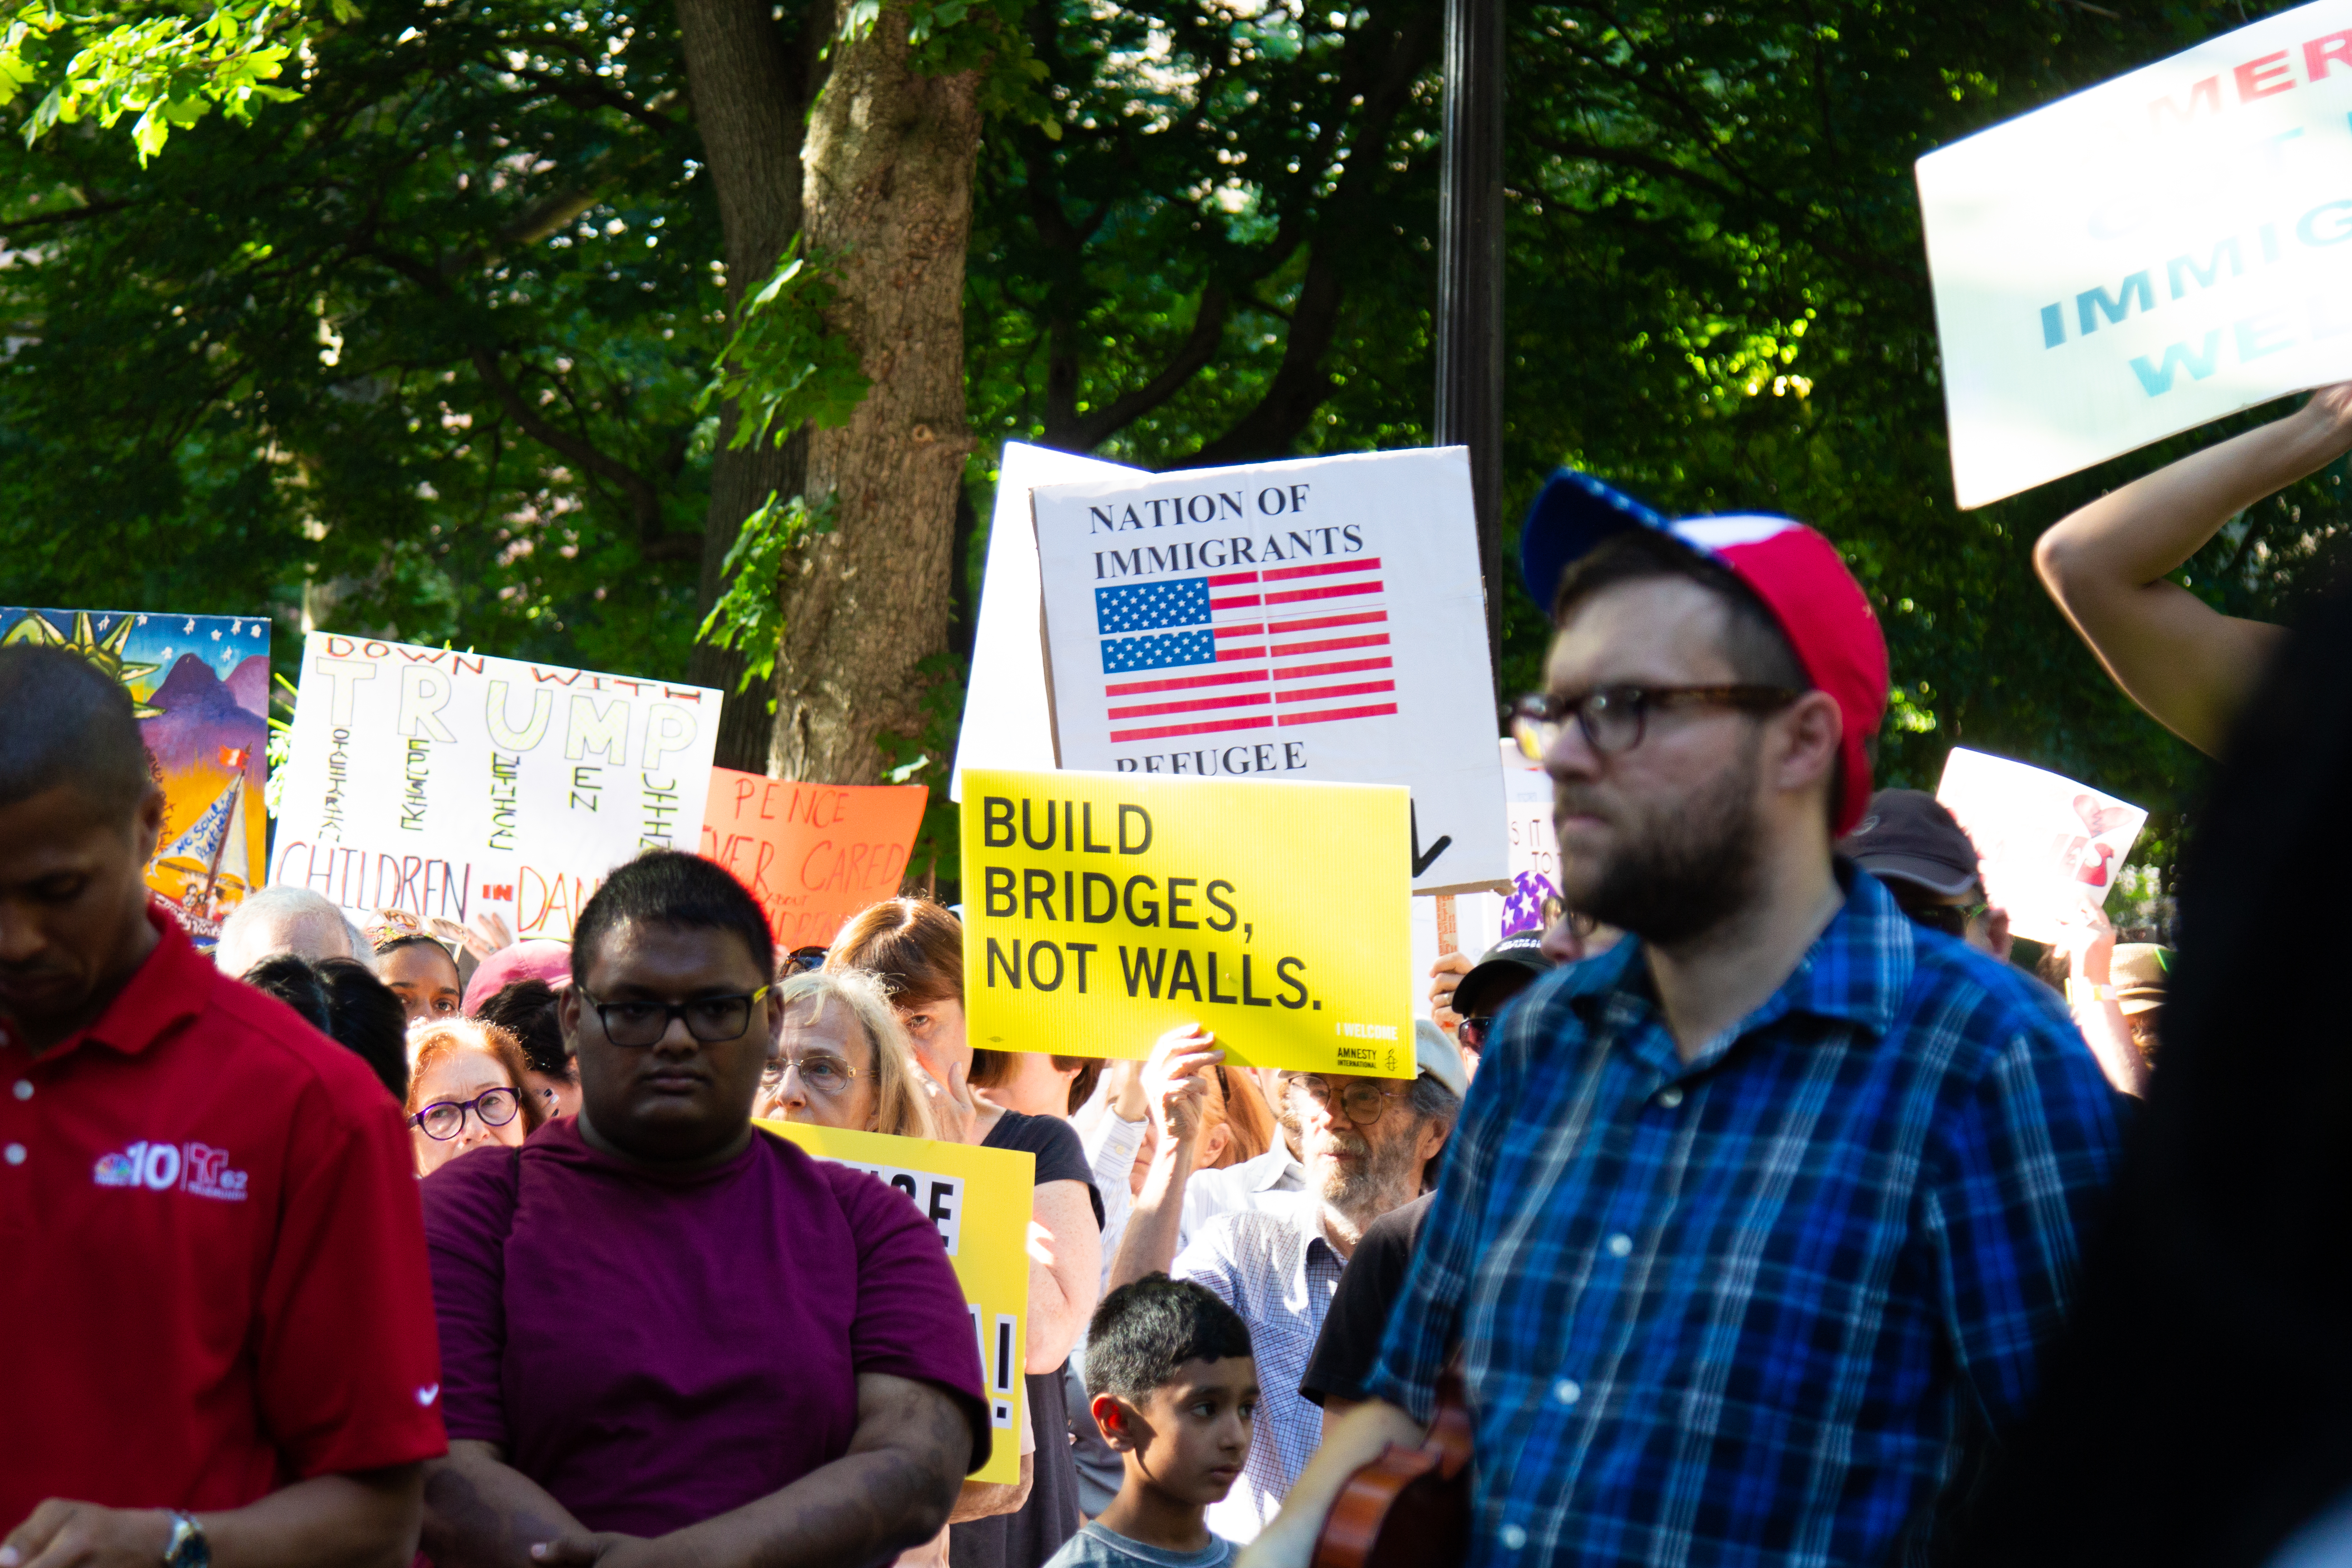 Protesters at the June 19 rally in Rittenhouse Square who called for reform of the Trump administration's immigration policies. Greta Anderson / AL DÍA News
